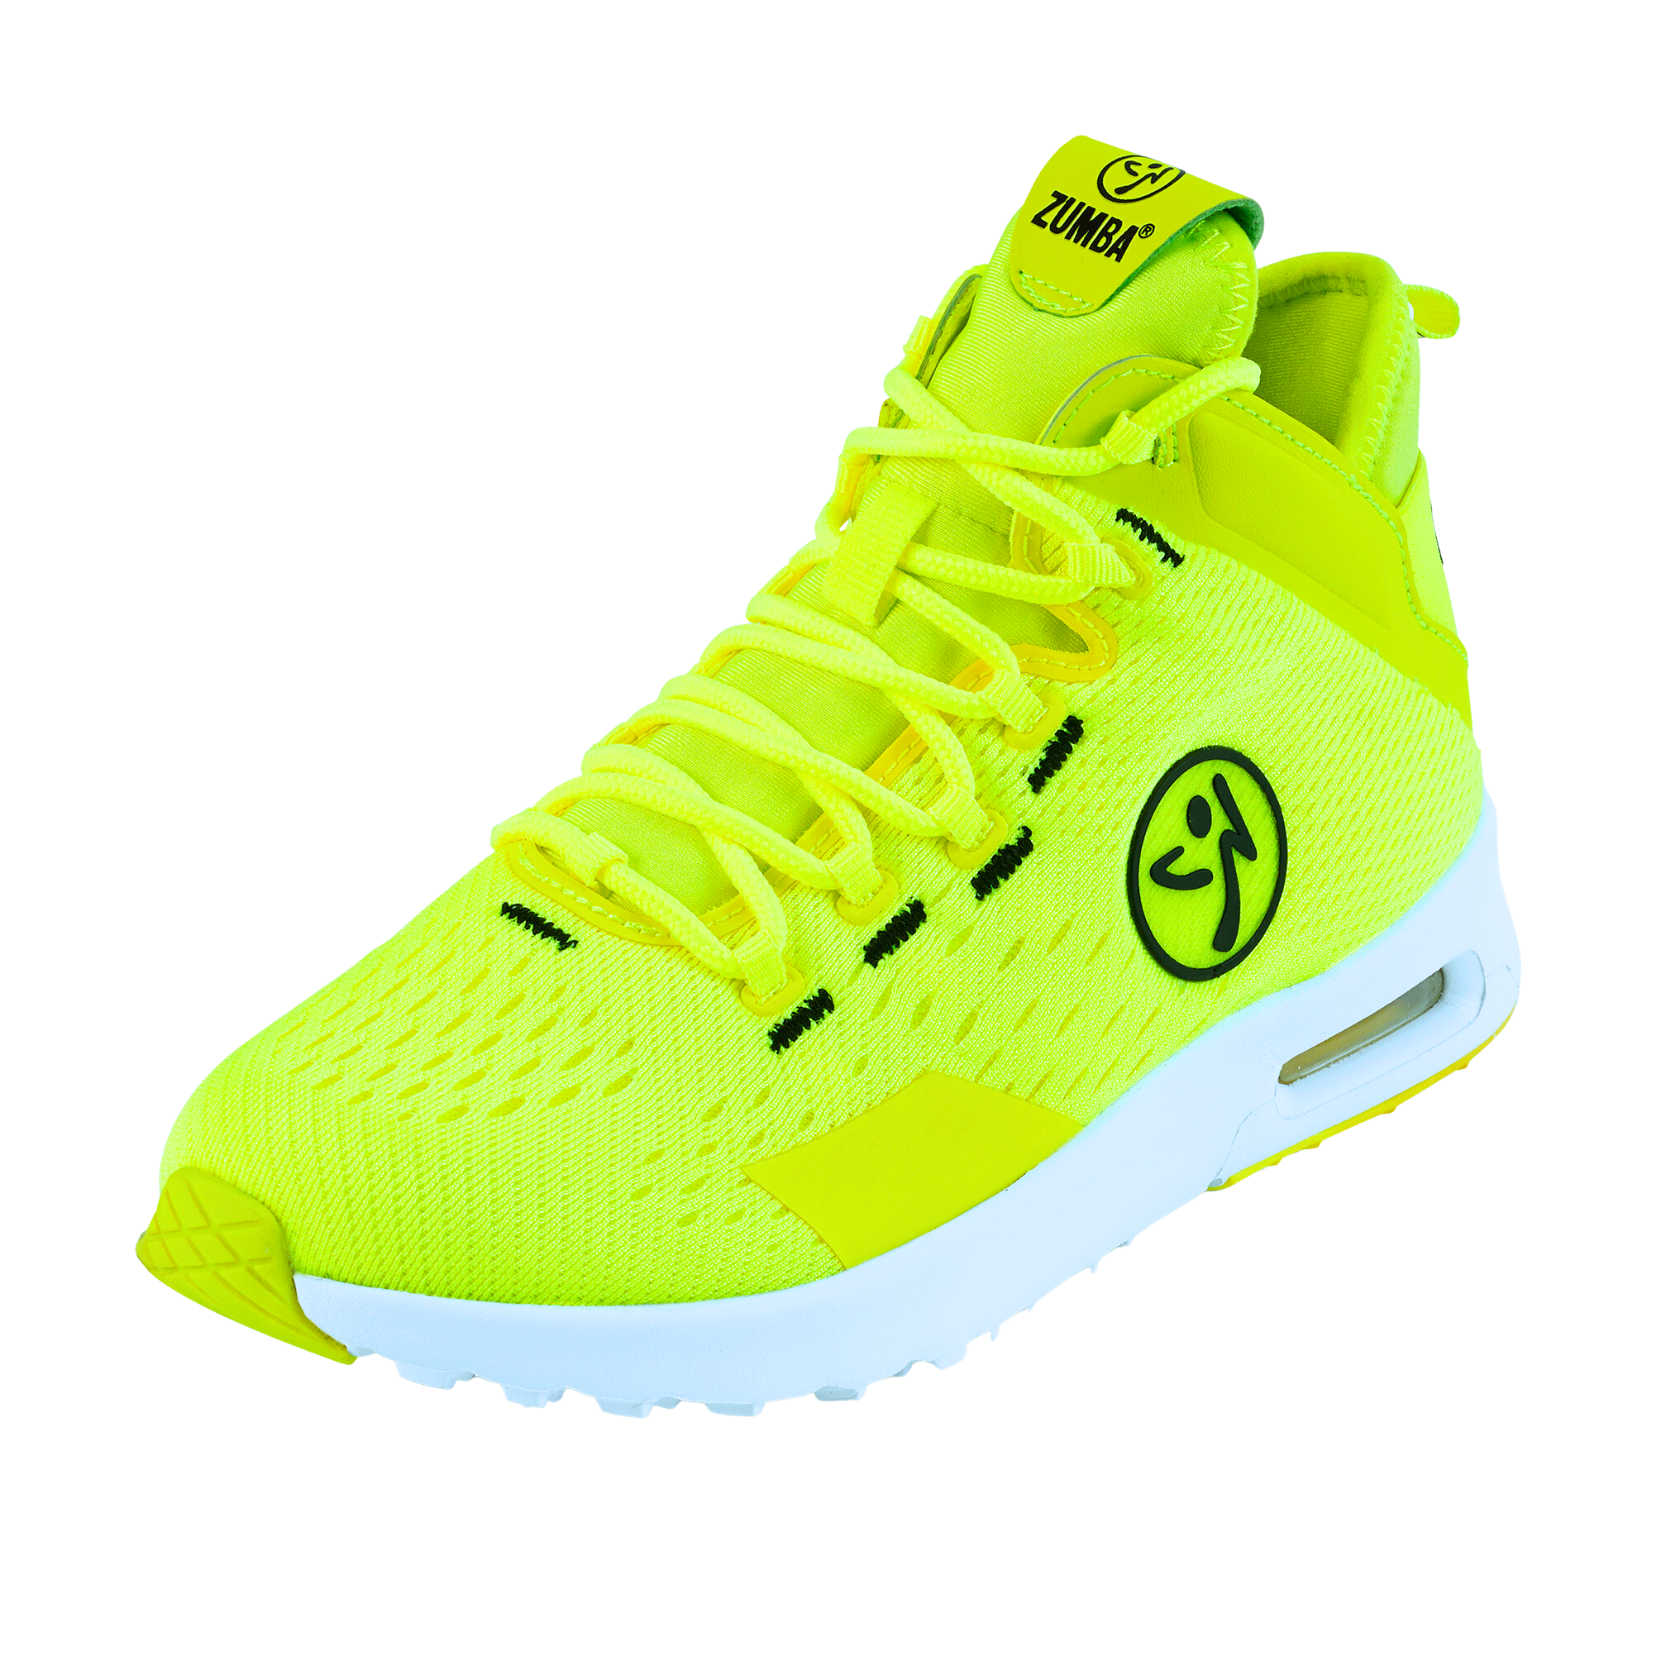 Zumba Air Funk - Yellow (Special Order)